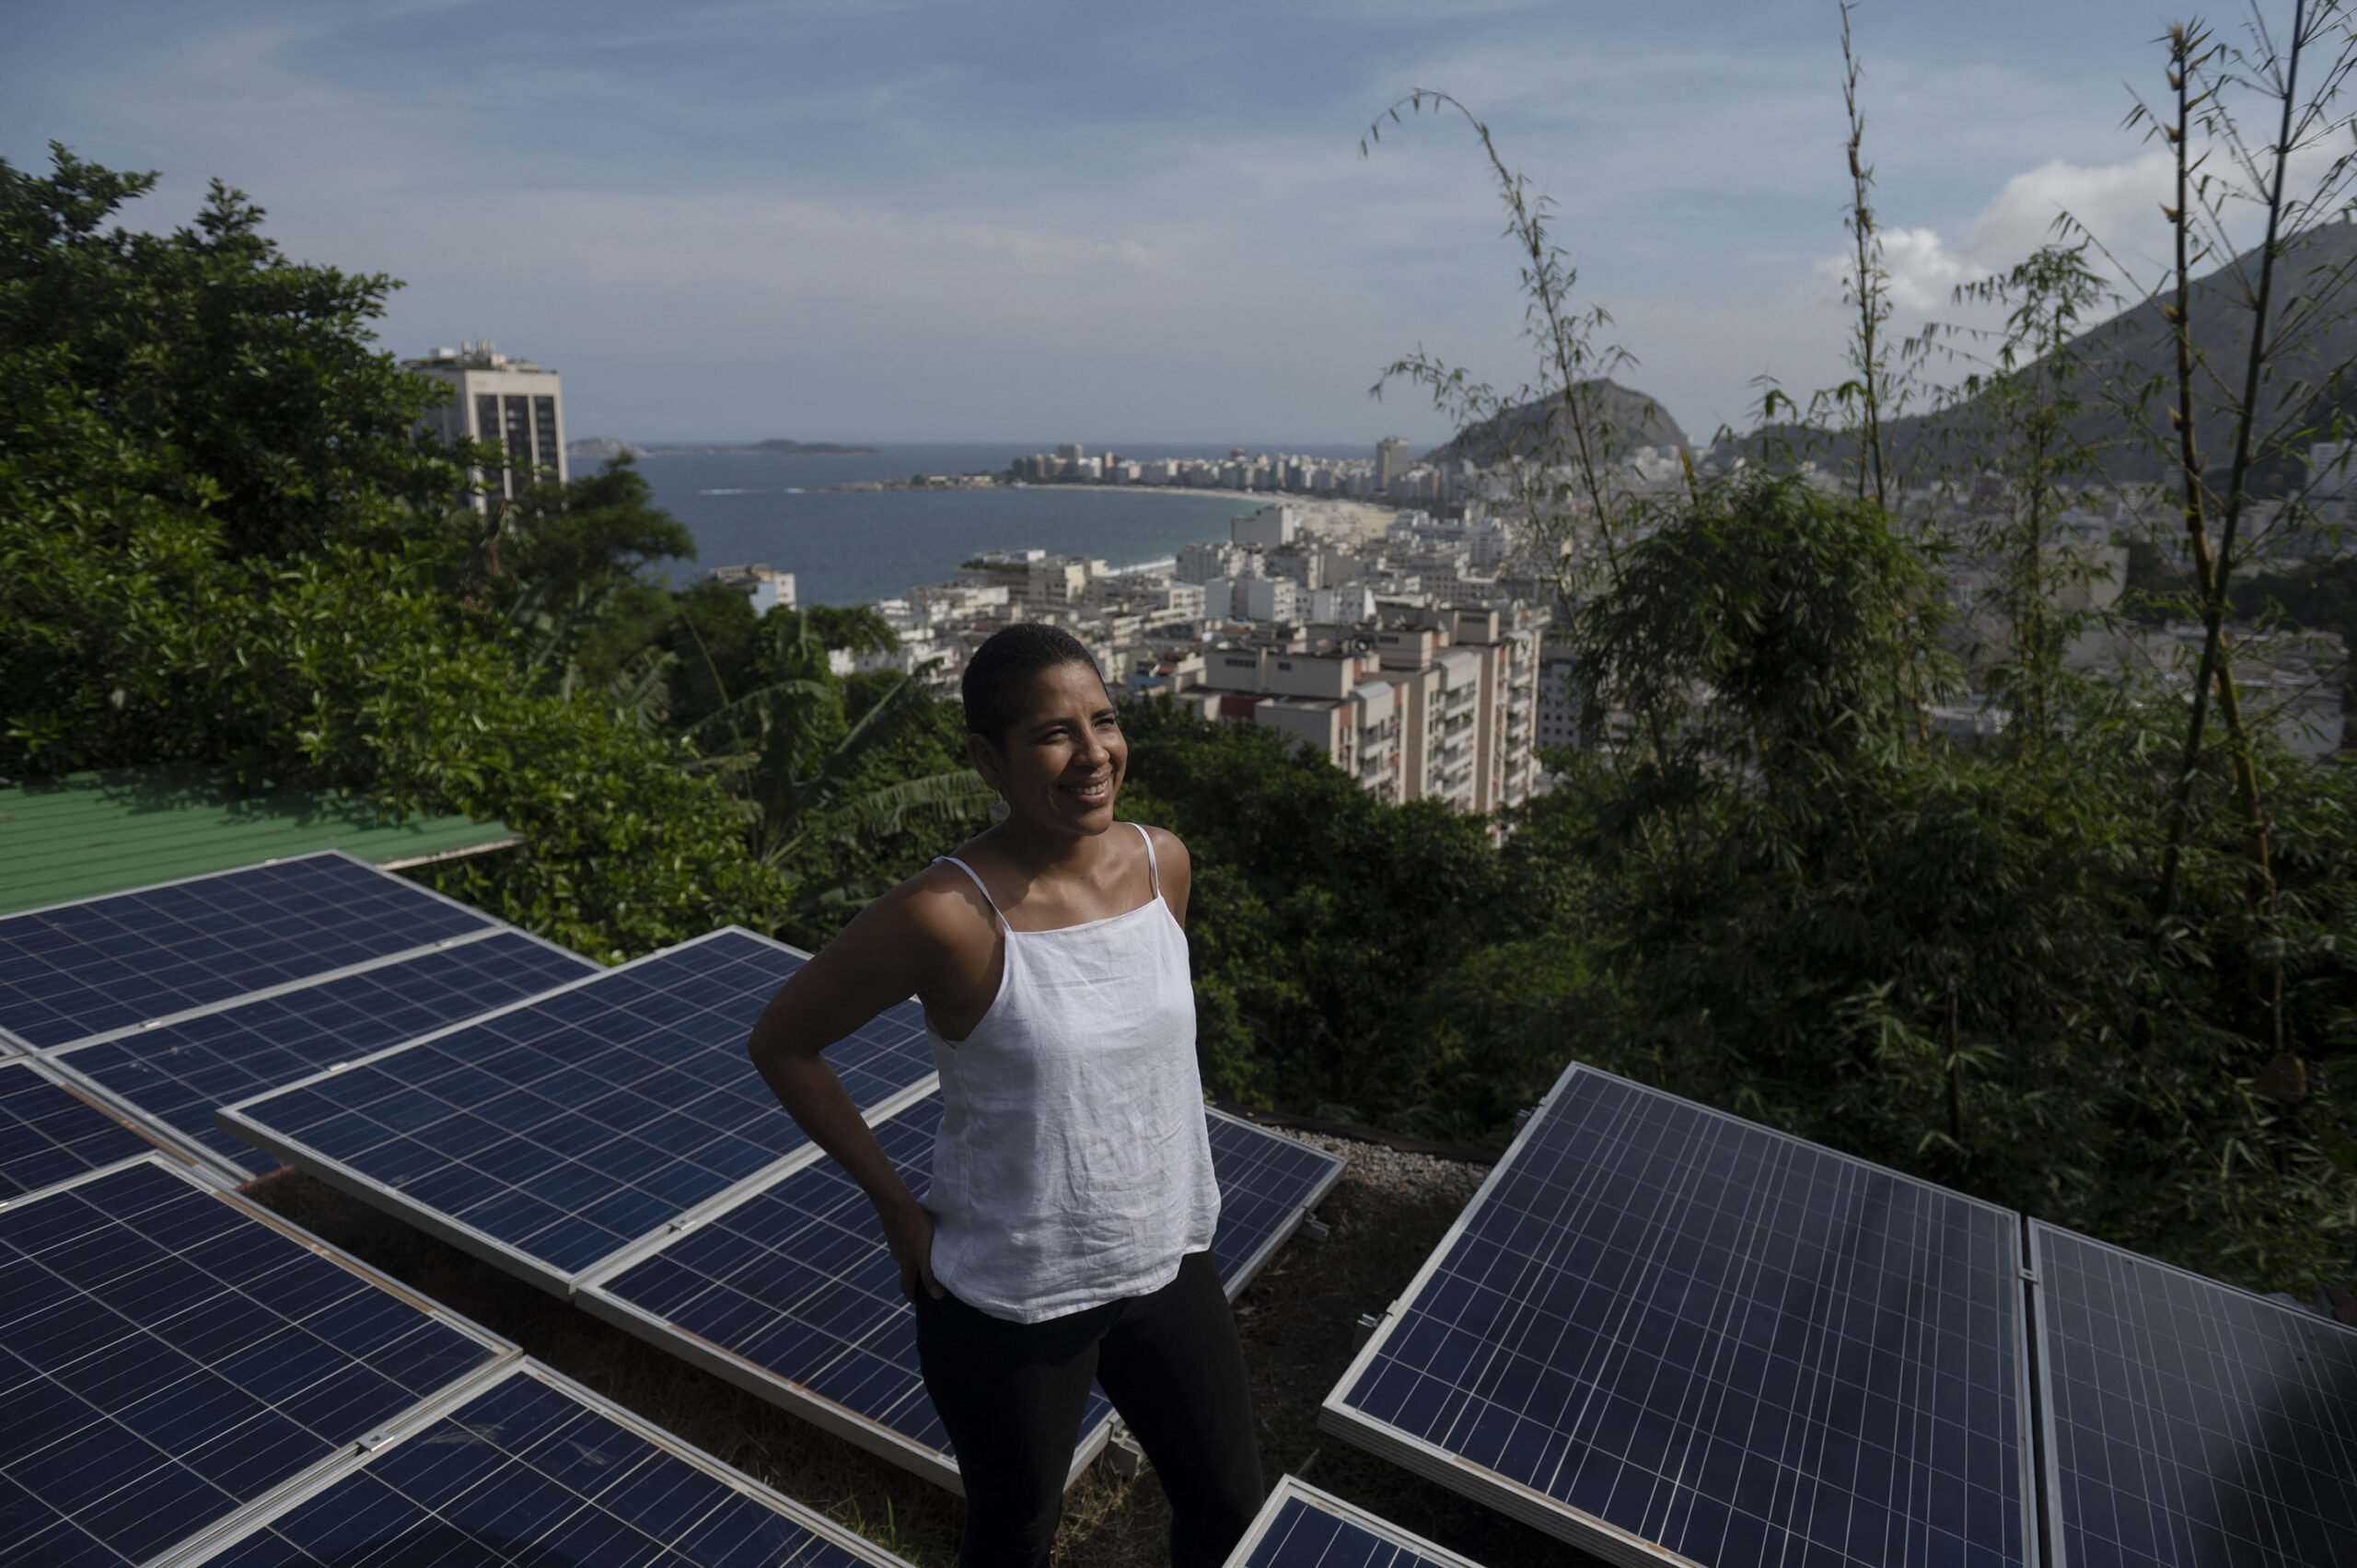 Brazil: This favela in Rio is covered with solar panels, a boon for residents